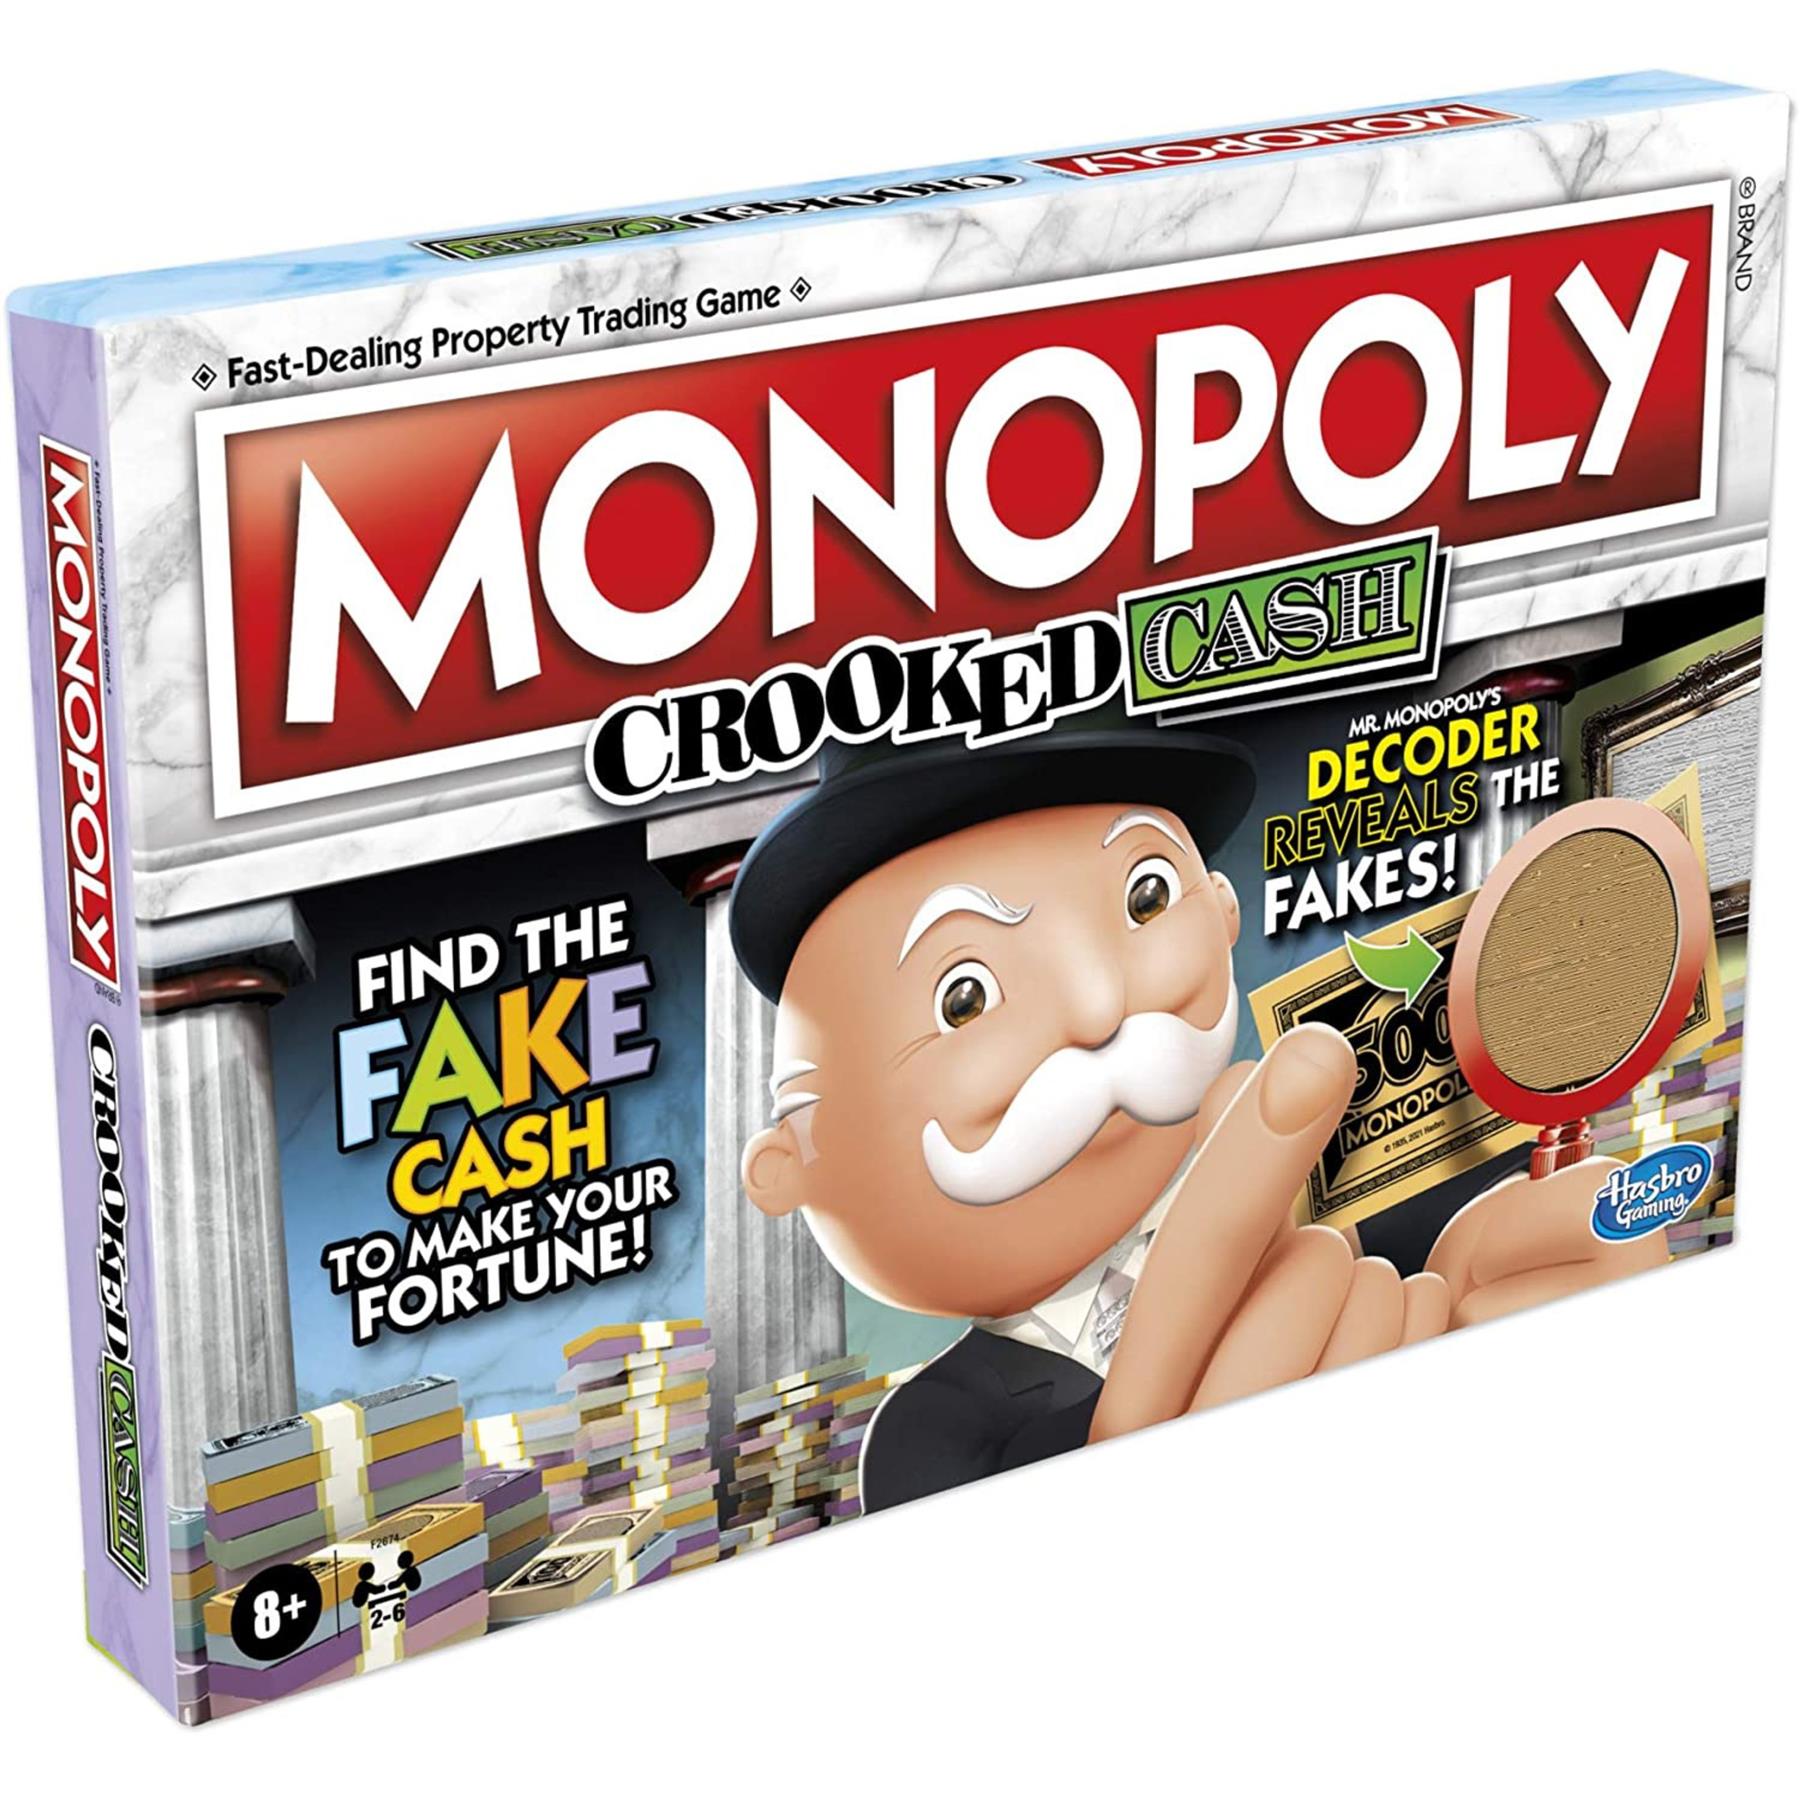 Monopoly Board Game Monopoly Crooked Cash Edition Board game